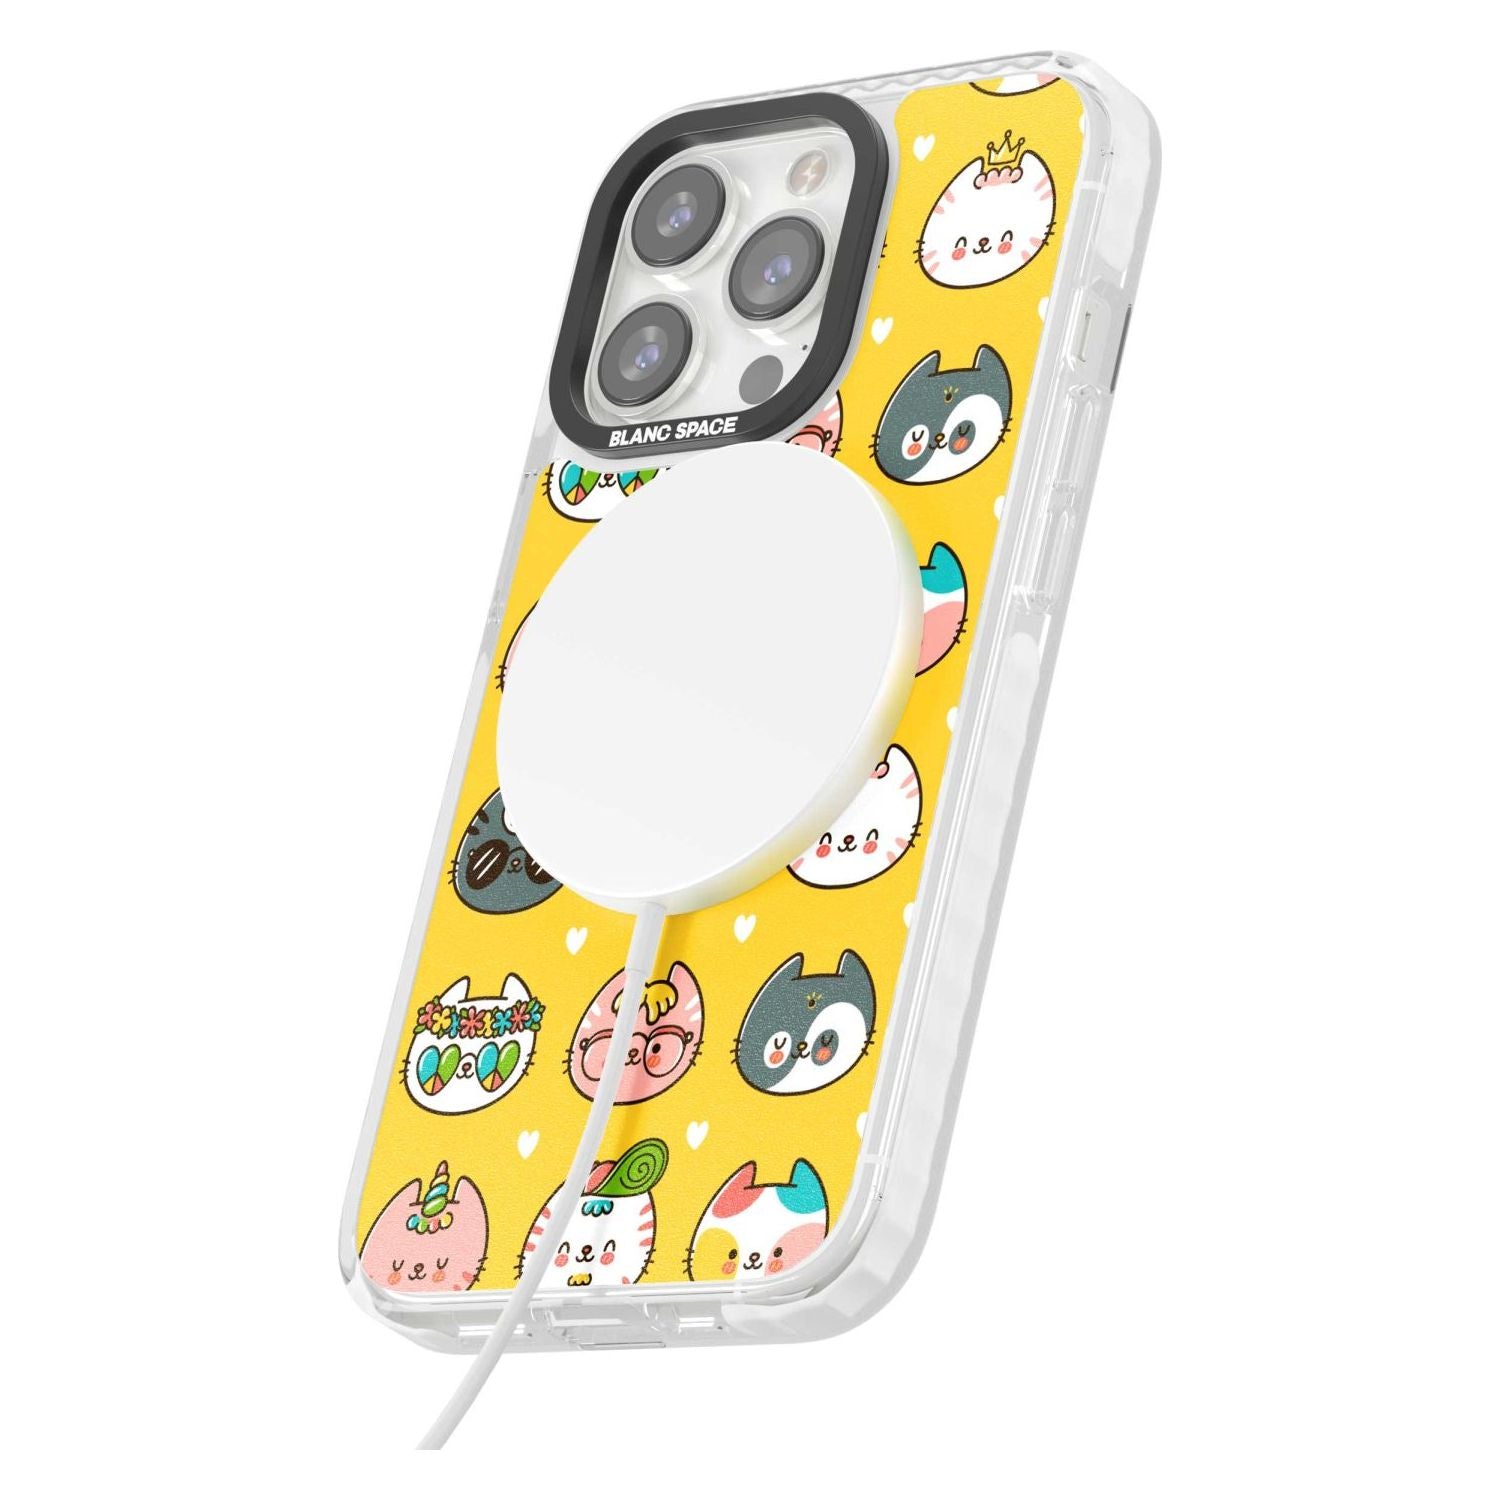 Mythical Cats Kawaii Pattern Phone Case iPhone 15 Pro Max / Black Impact Case,iPhone 15 Plus / Black Impact Case,iPhone 15 Pro / Black Impact Case,iPhone 15 / Black Impact Case,iPhone 15 Pro Max / Impact Case,iPhone 15 Plus / Impact Case,iPhone 15 Pro / Impact Case,iPhone 15 / Impact Case,iPhone 15 Pro Max / Magsafe Black Impact Case,iPhone 15 Plus / Magsafe Black Impact Case,iPhone 15 Pro / Magsafe Black Impact Case,iPhone 15 / Magsafe Black Impact Case,iPhone 14 Pro Max / Black Impact Case,iPhone 14 Plus 